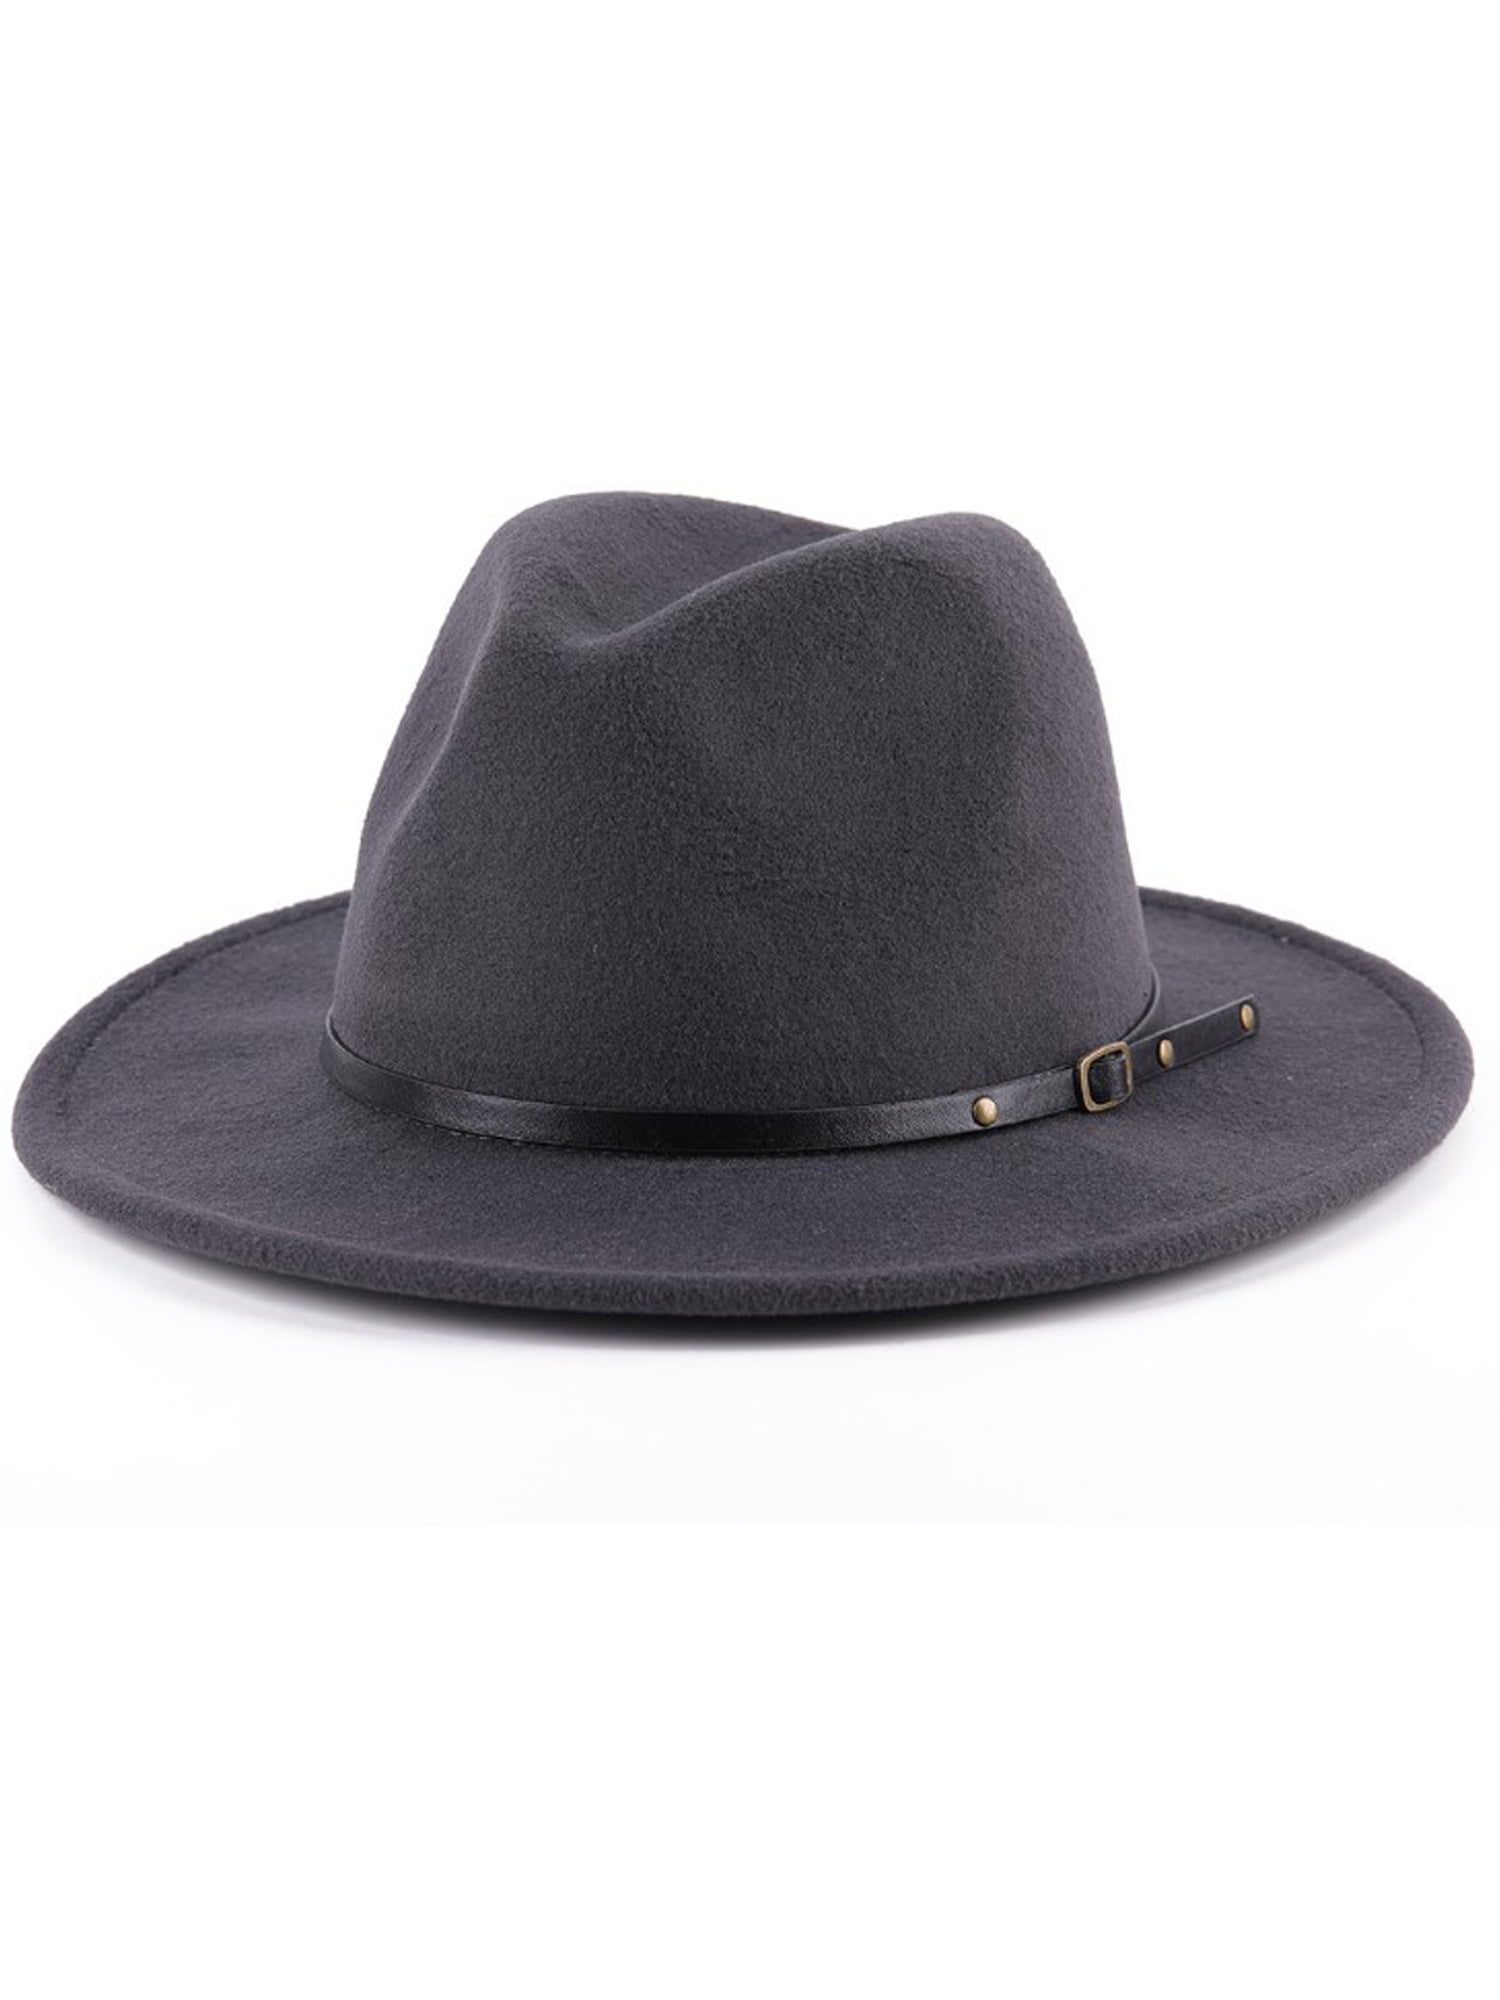 Gangster Manhattan Trilby Hats Vintage Style Hats Elegant Gentlemans Traditional Trilby Hat 100% Wool Trilby Hats Unisex Hat 